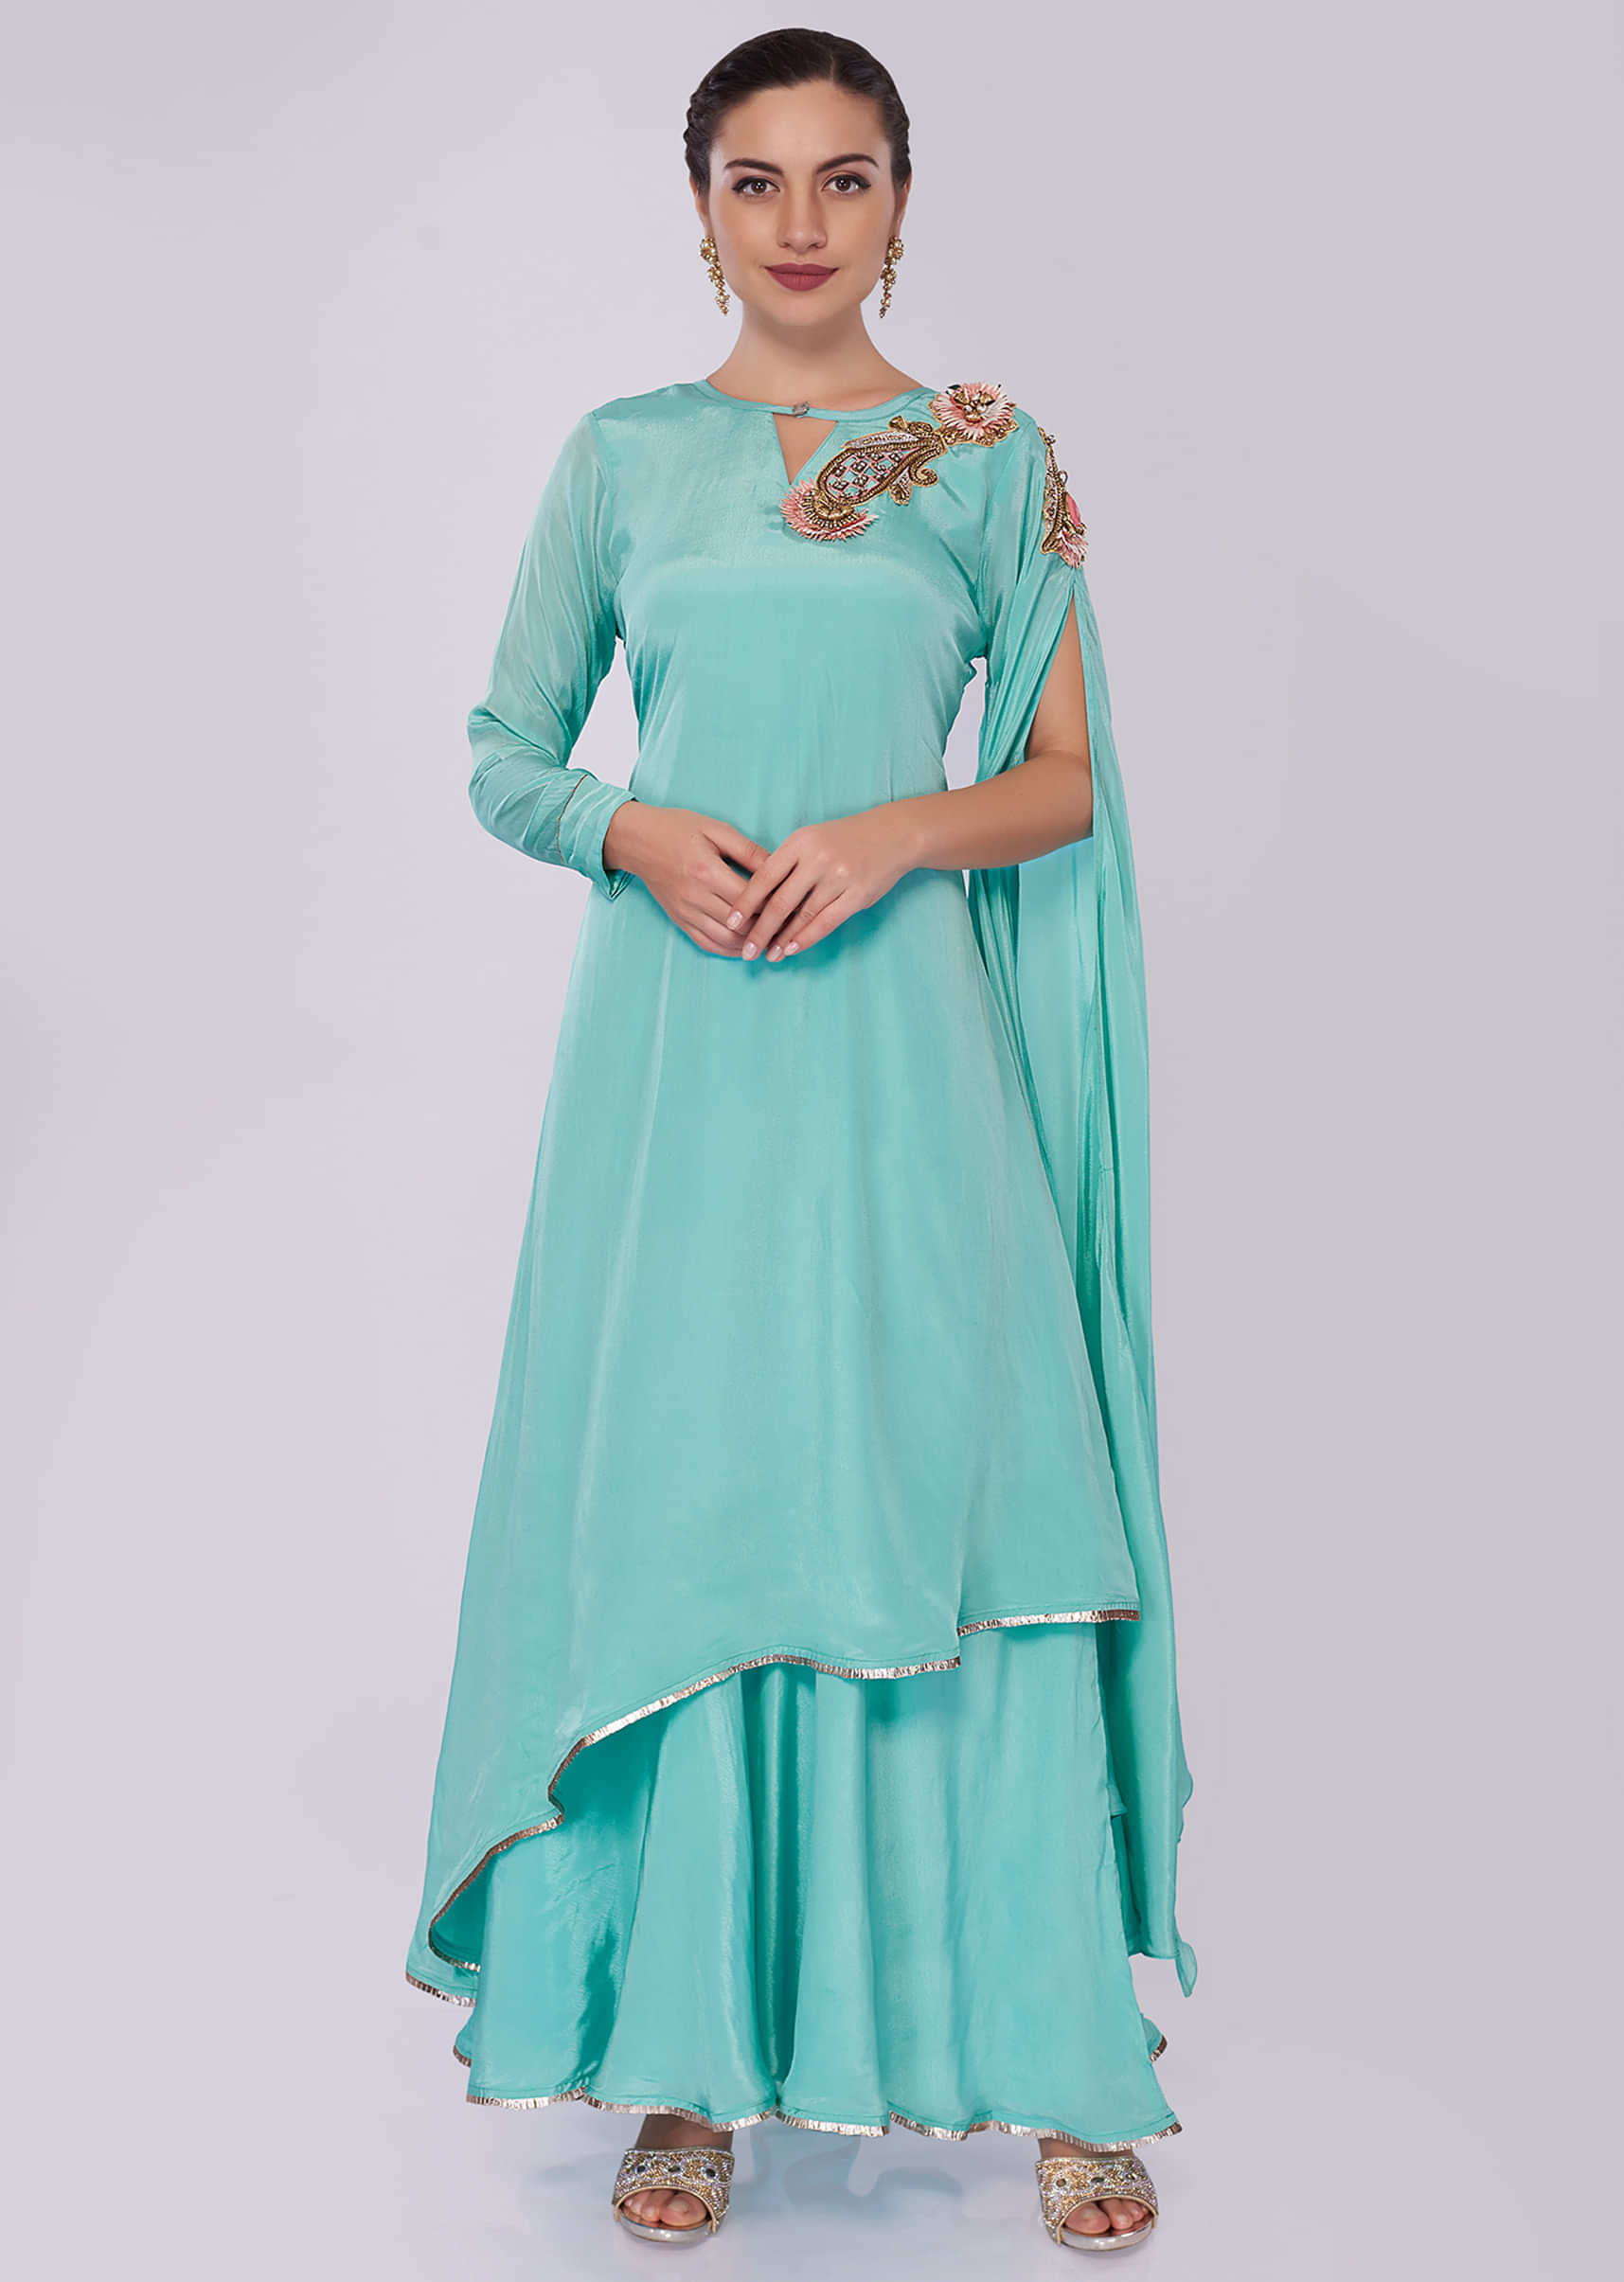 Sky blue double layer tunic dress featuring in satin crepe